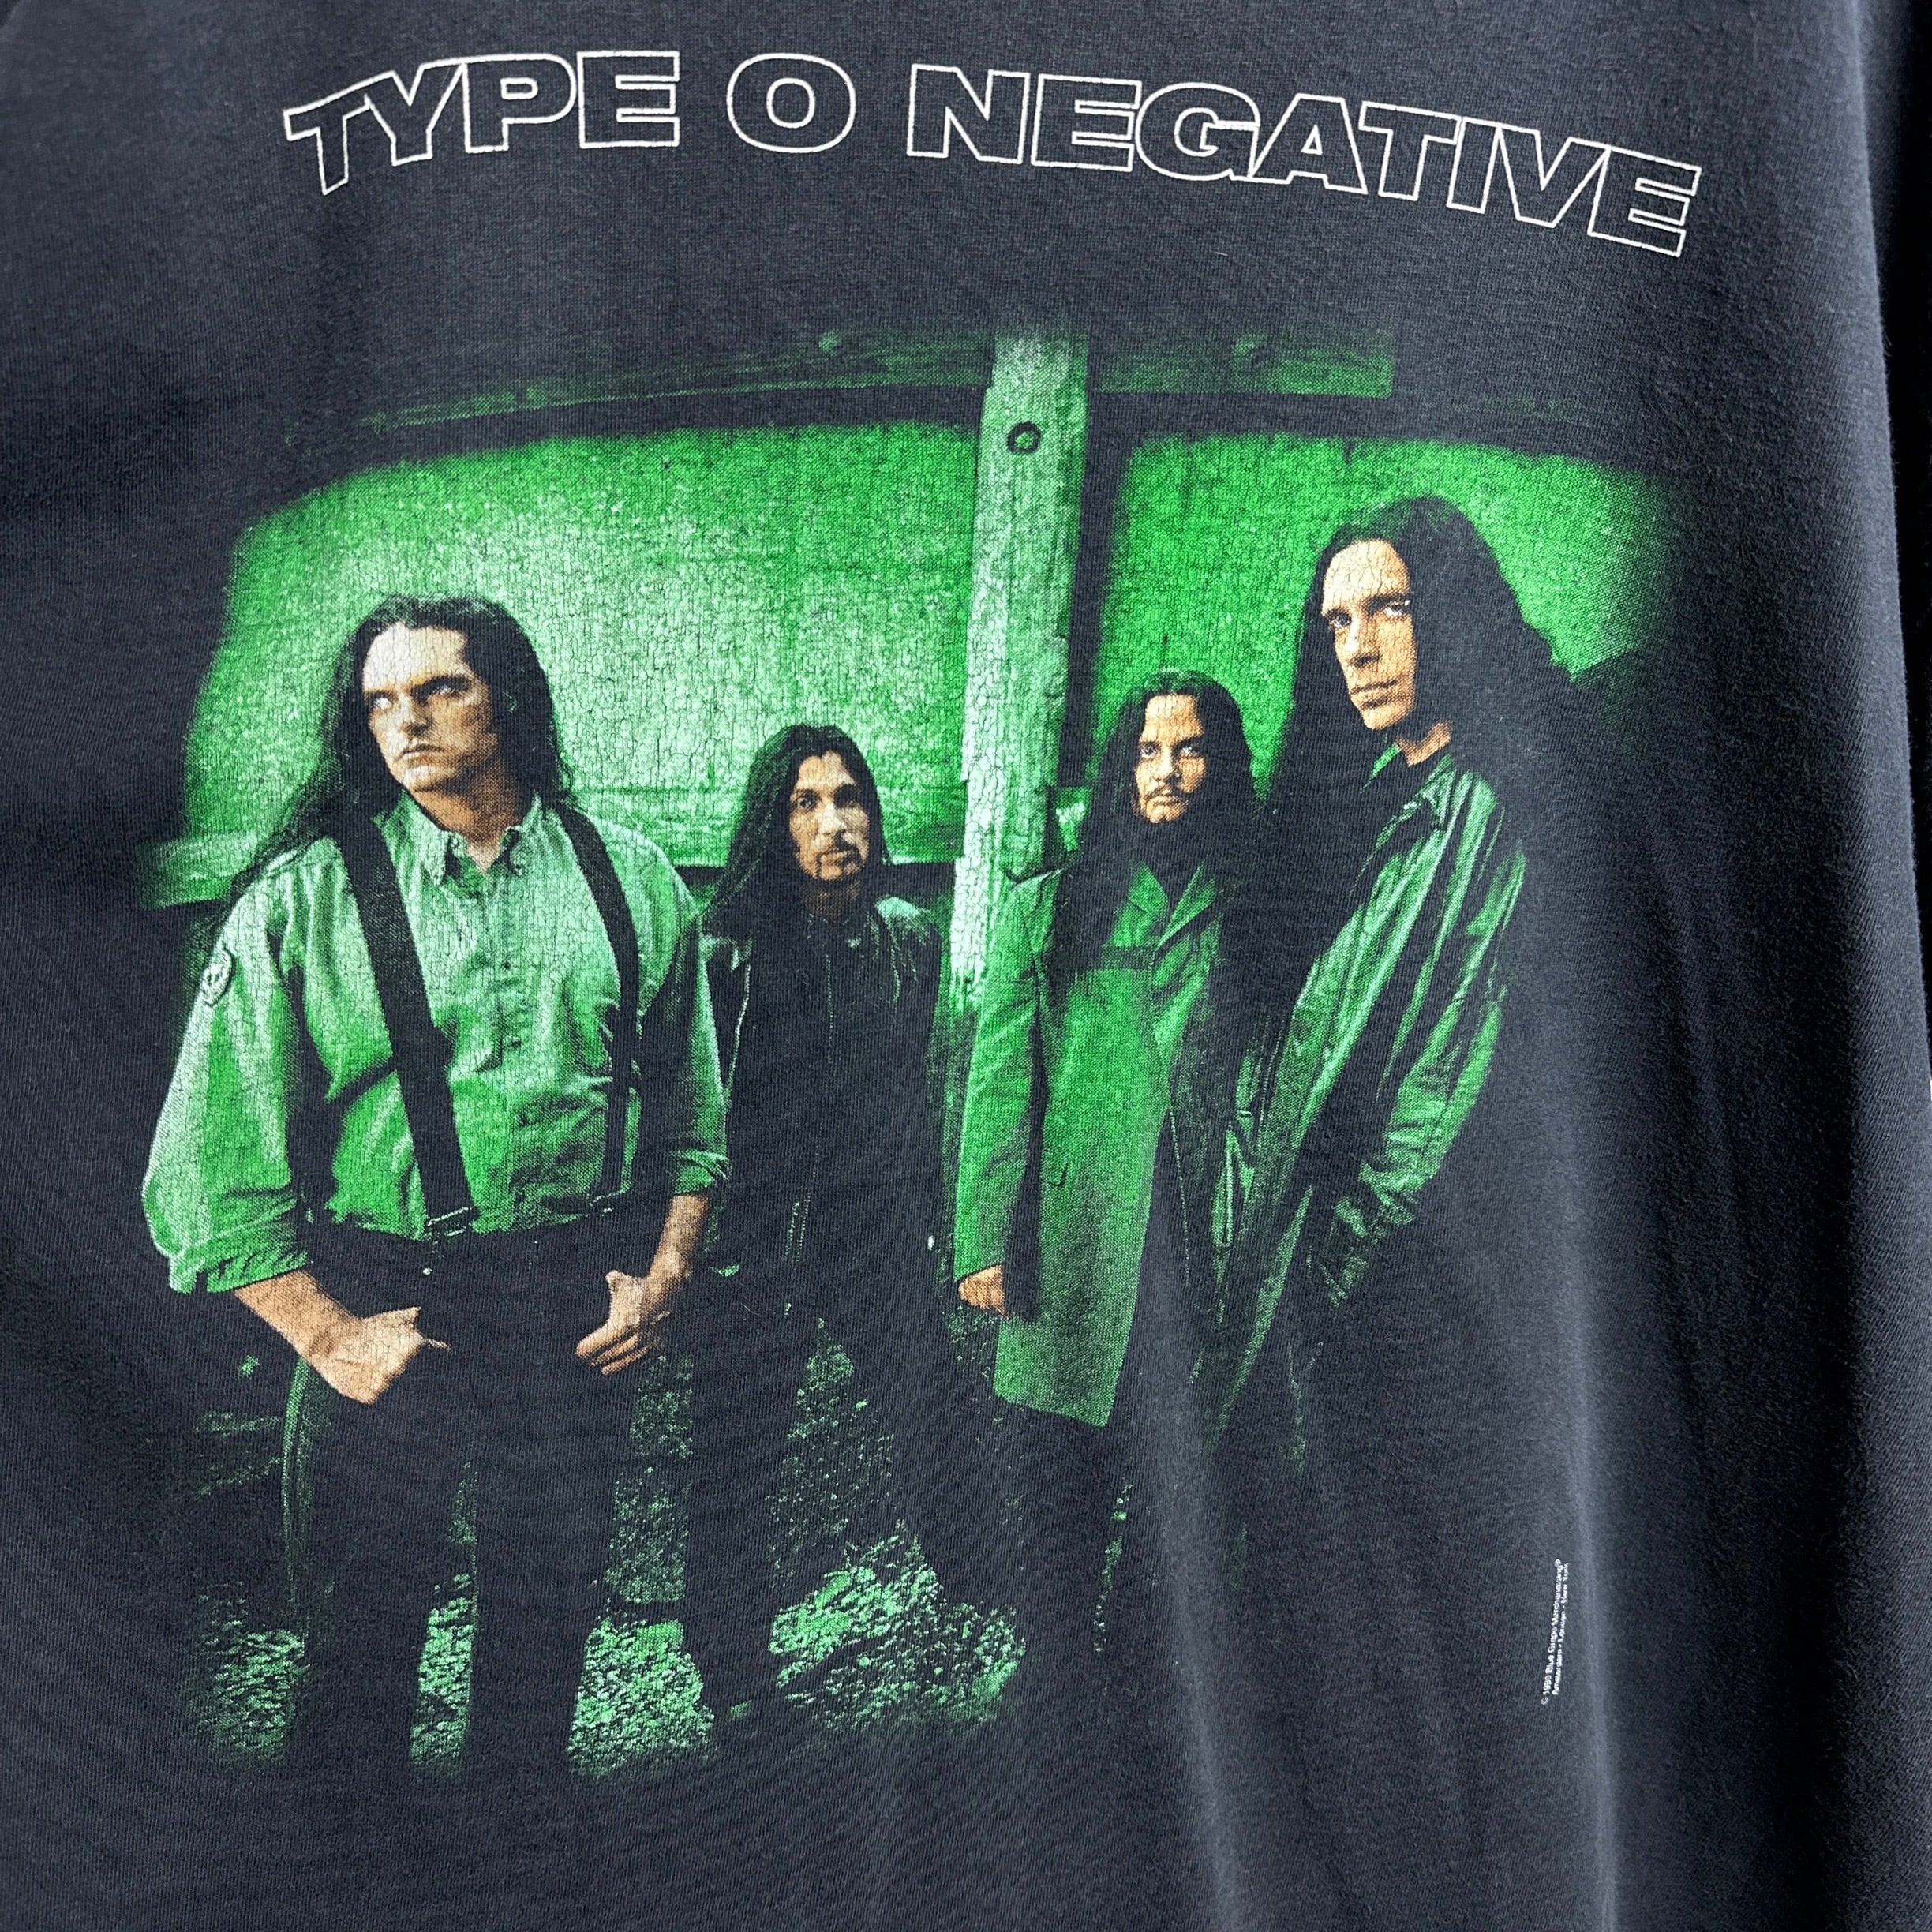 90s type o negative vintage t ヴィンテージ